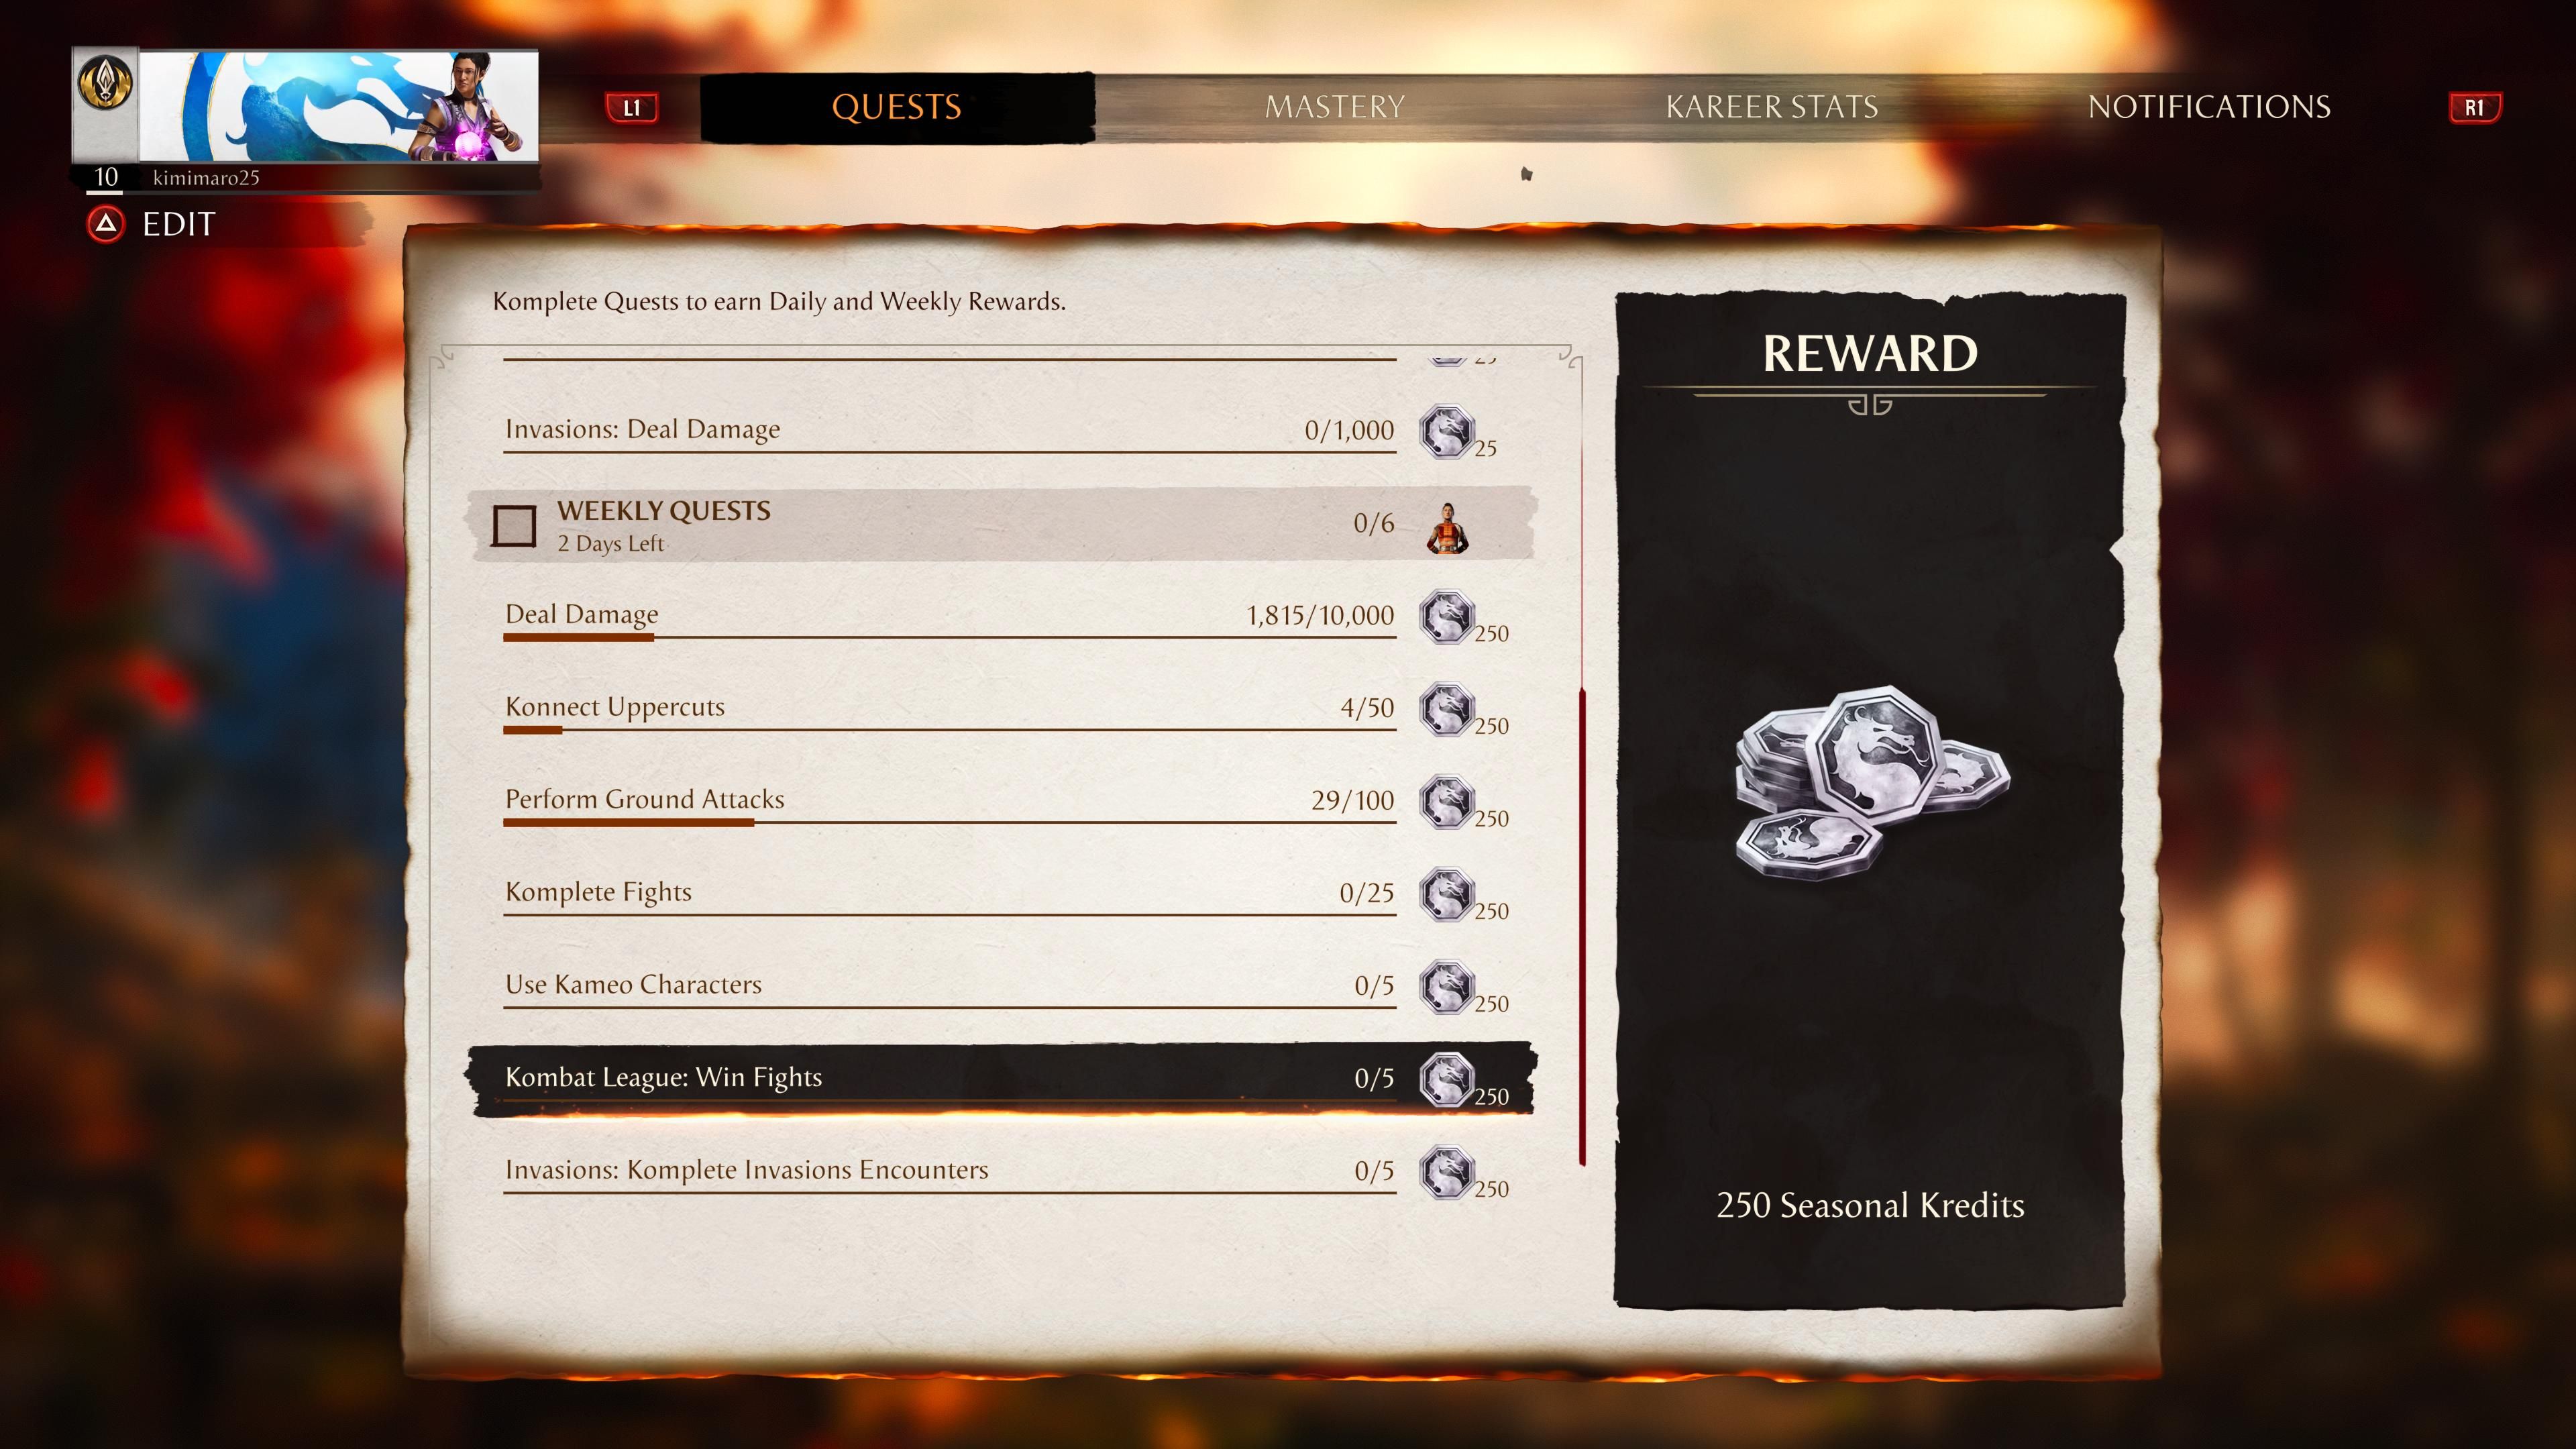 A screenshot showing different objectives you can do to earn Seasonal Kredits.